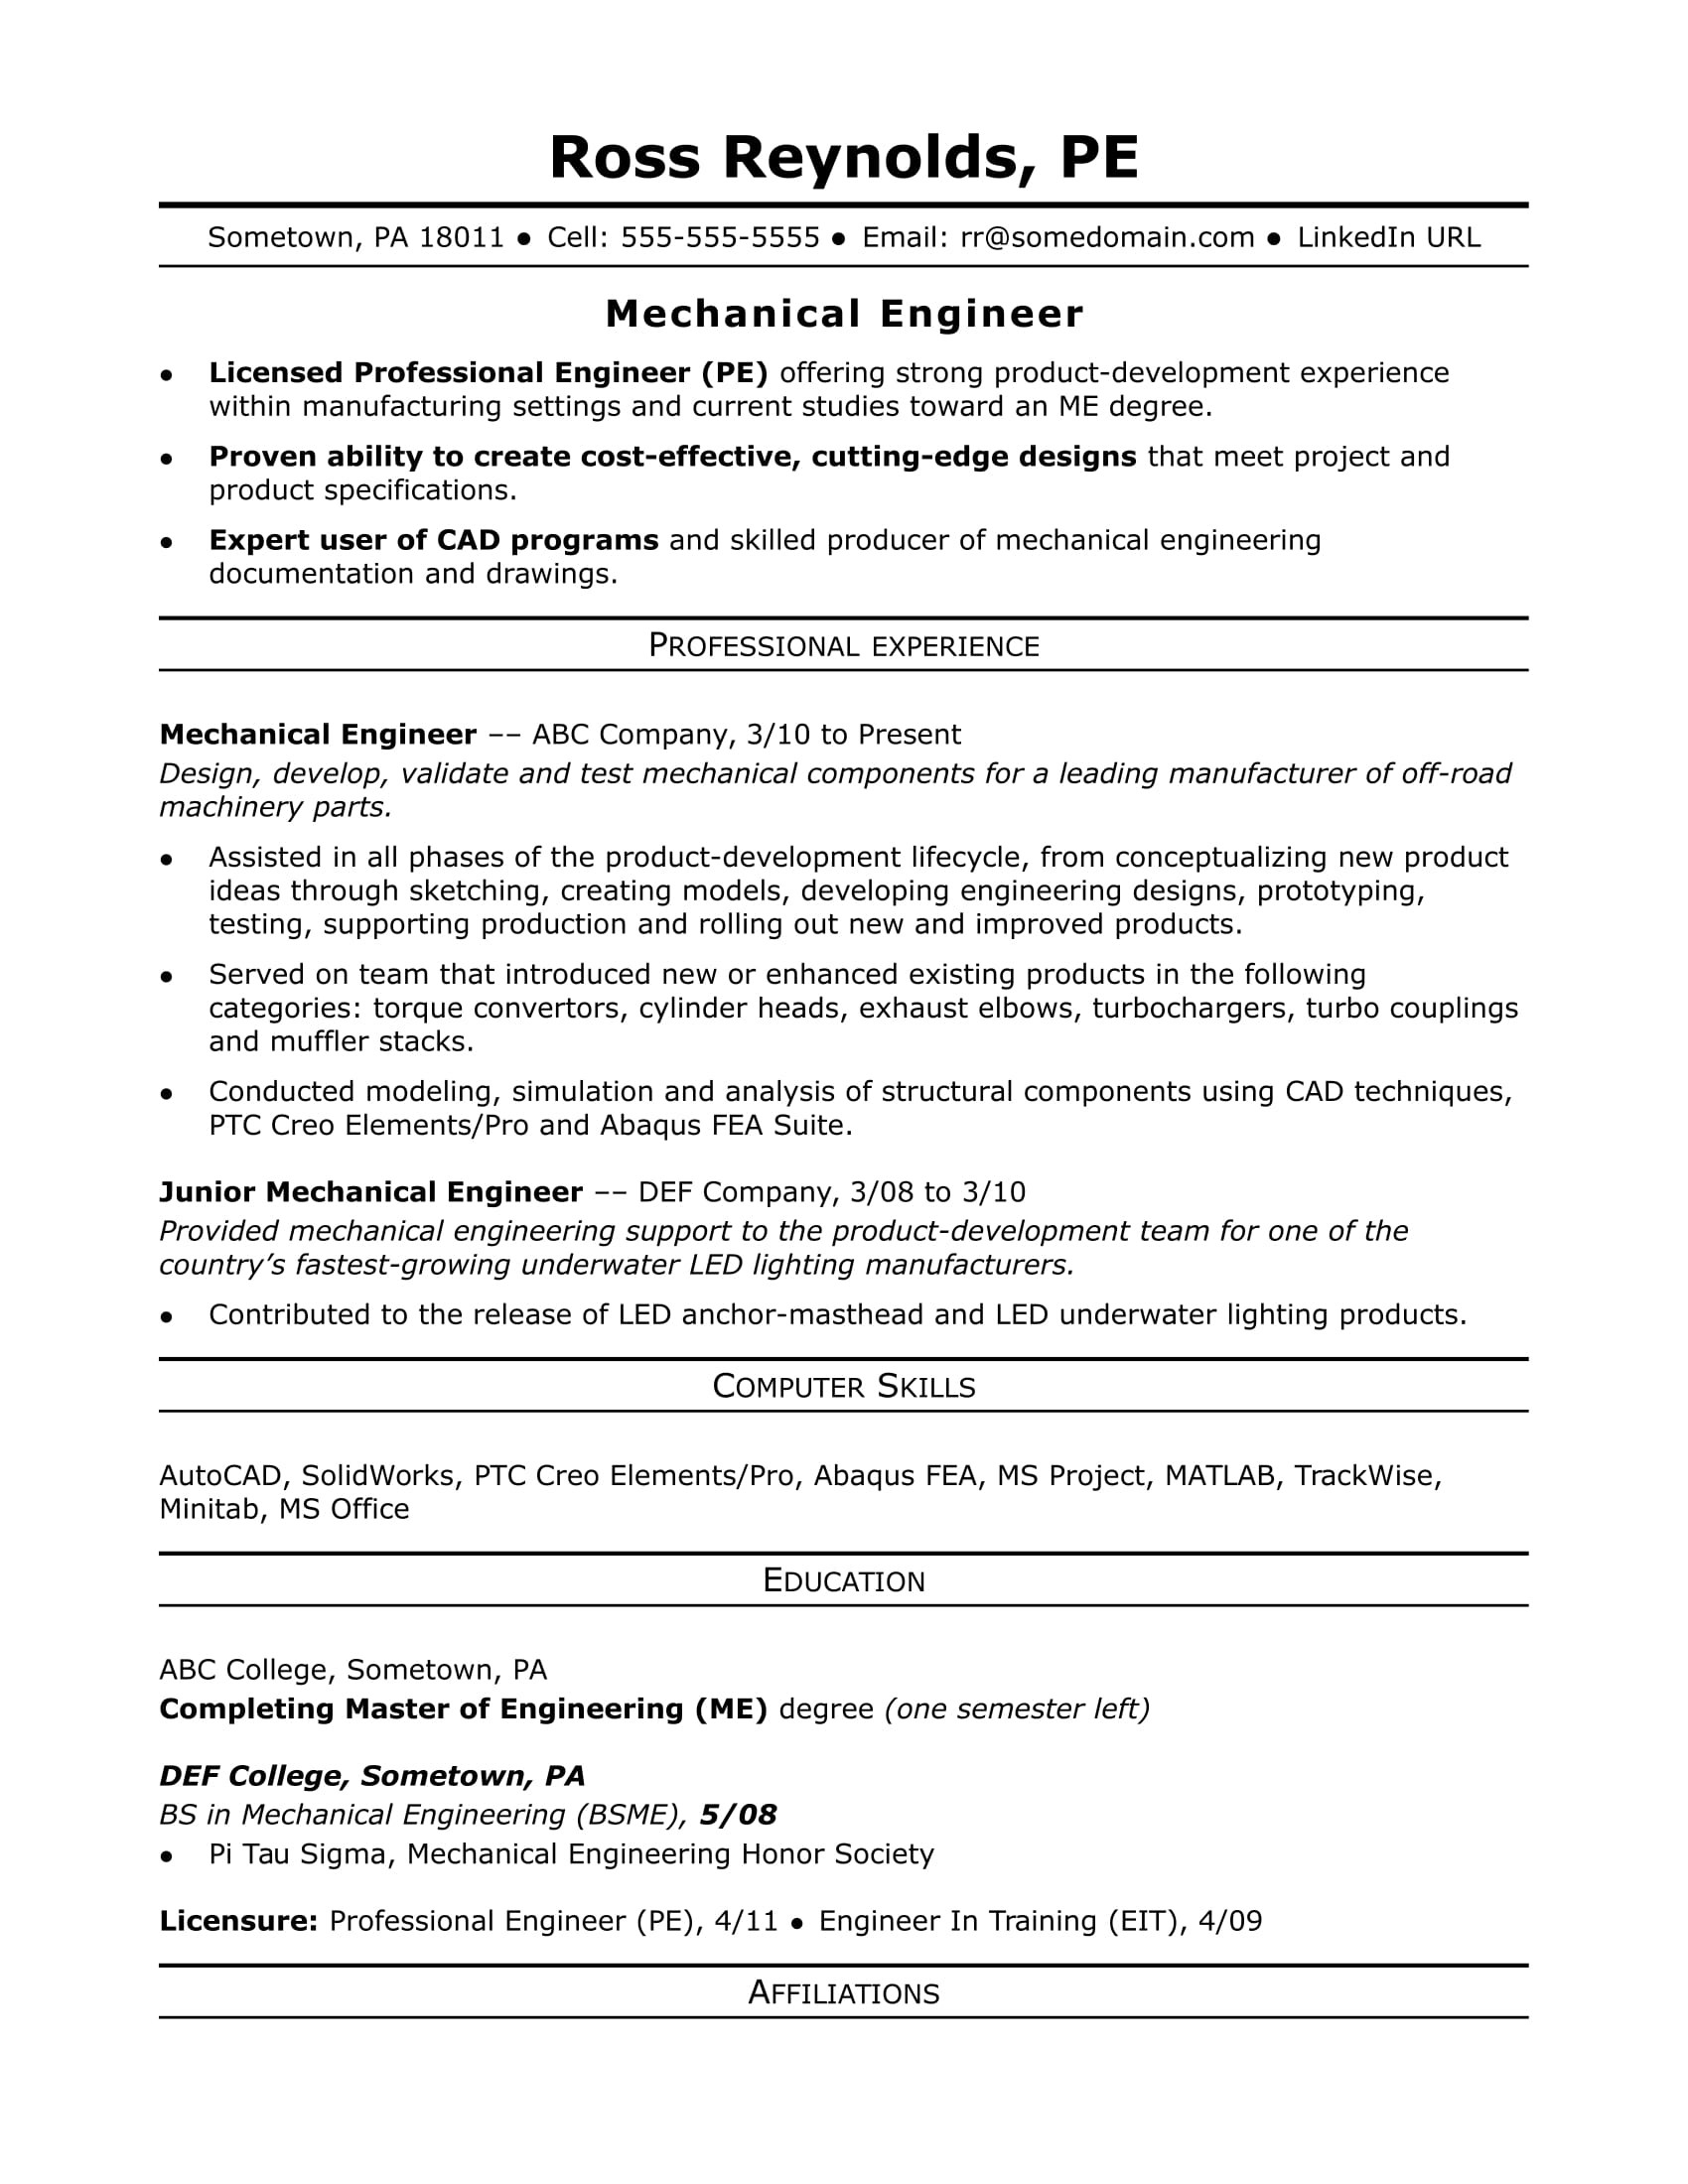 Resume Samples for Experienced Engineering Professionals Sample Resume for A Midlevel Mechanical Engineer Monster.com